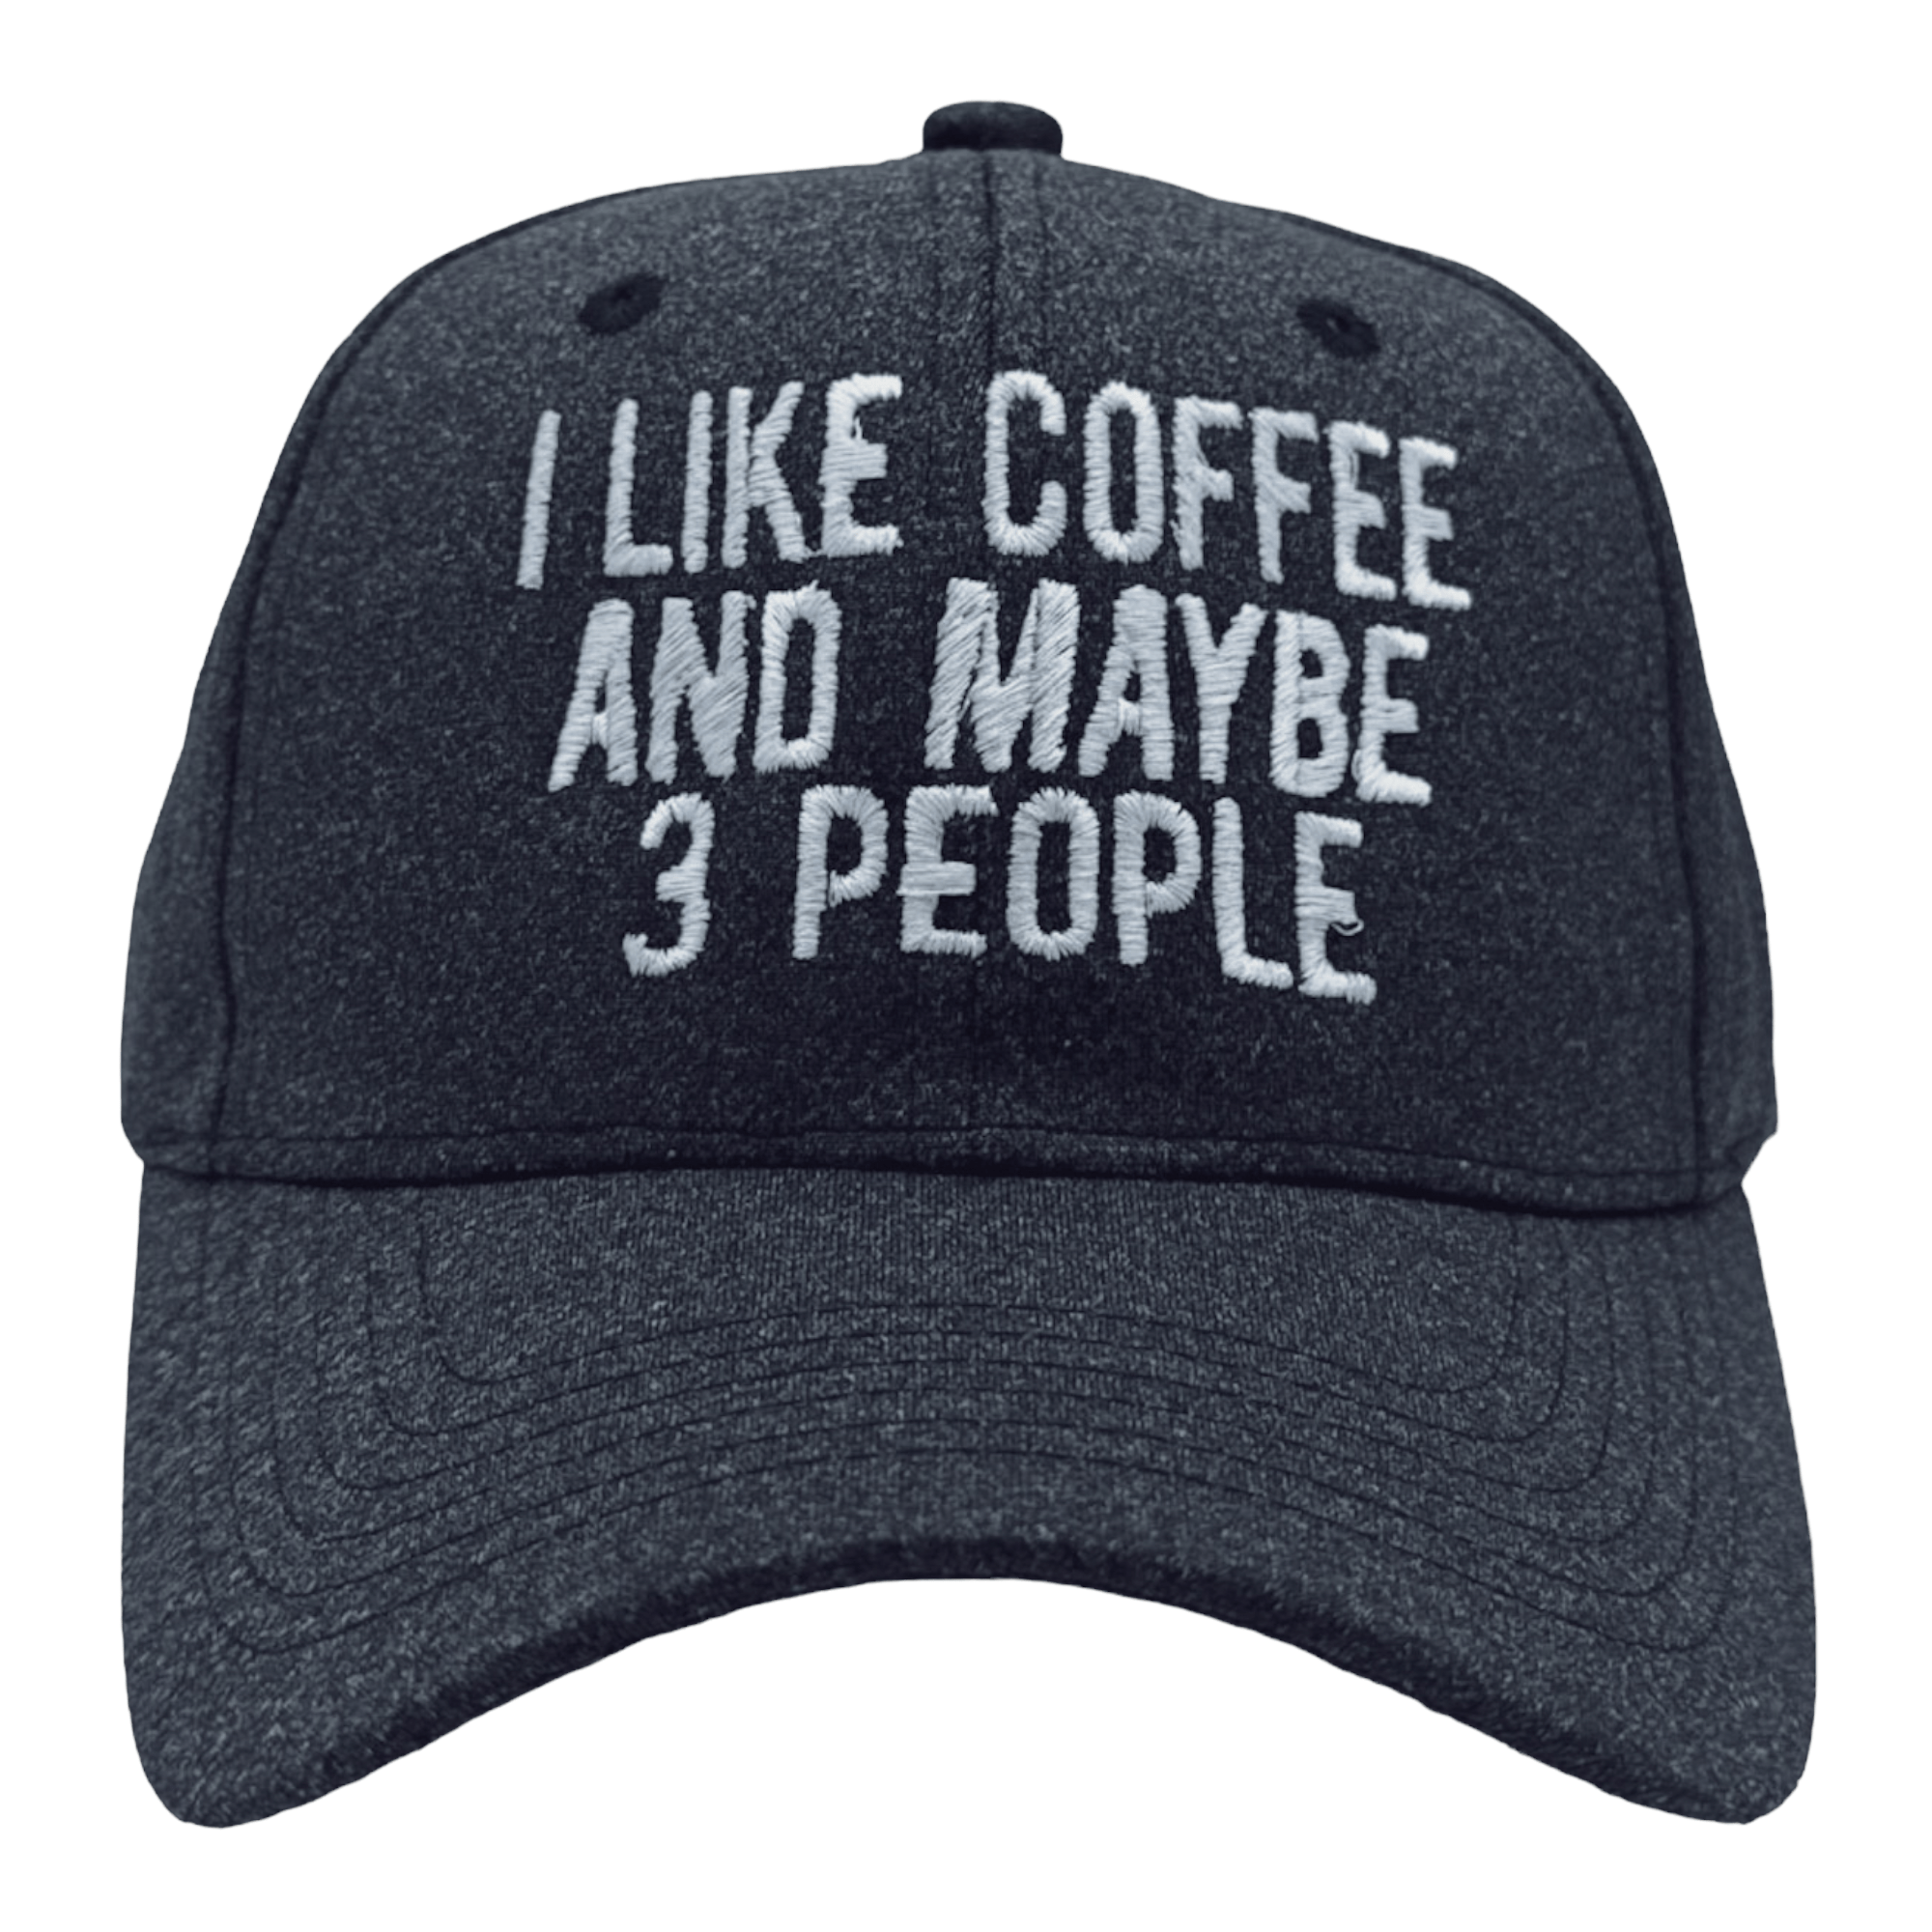 I Like Coffee And Maybe 3 People  -  Crazy Dog T-Shirts